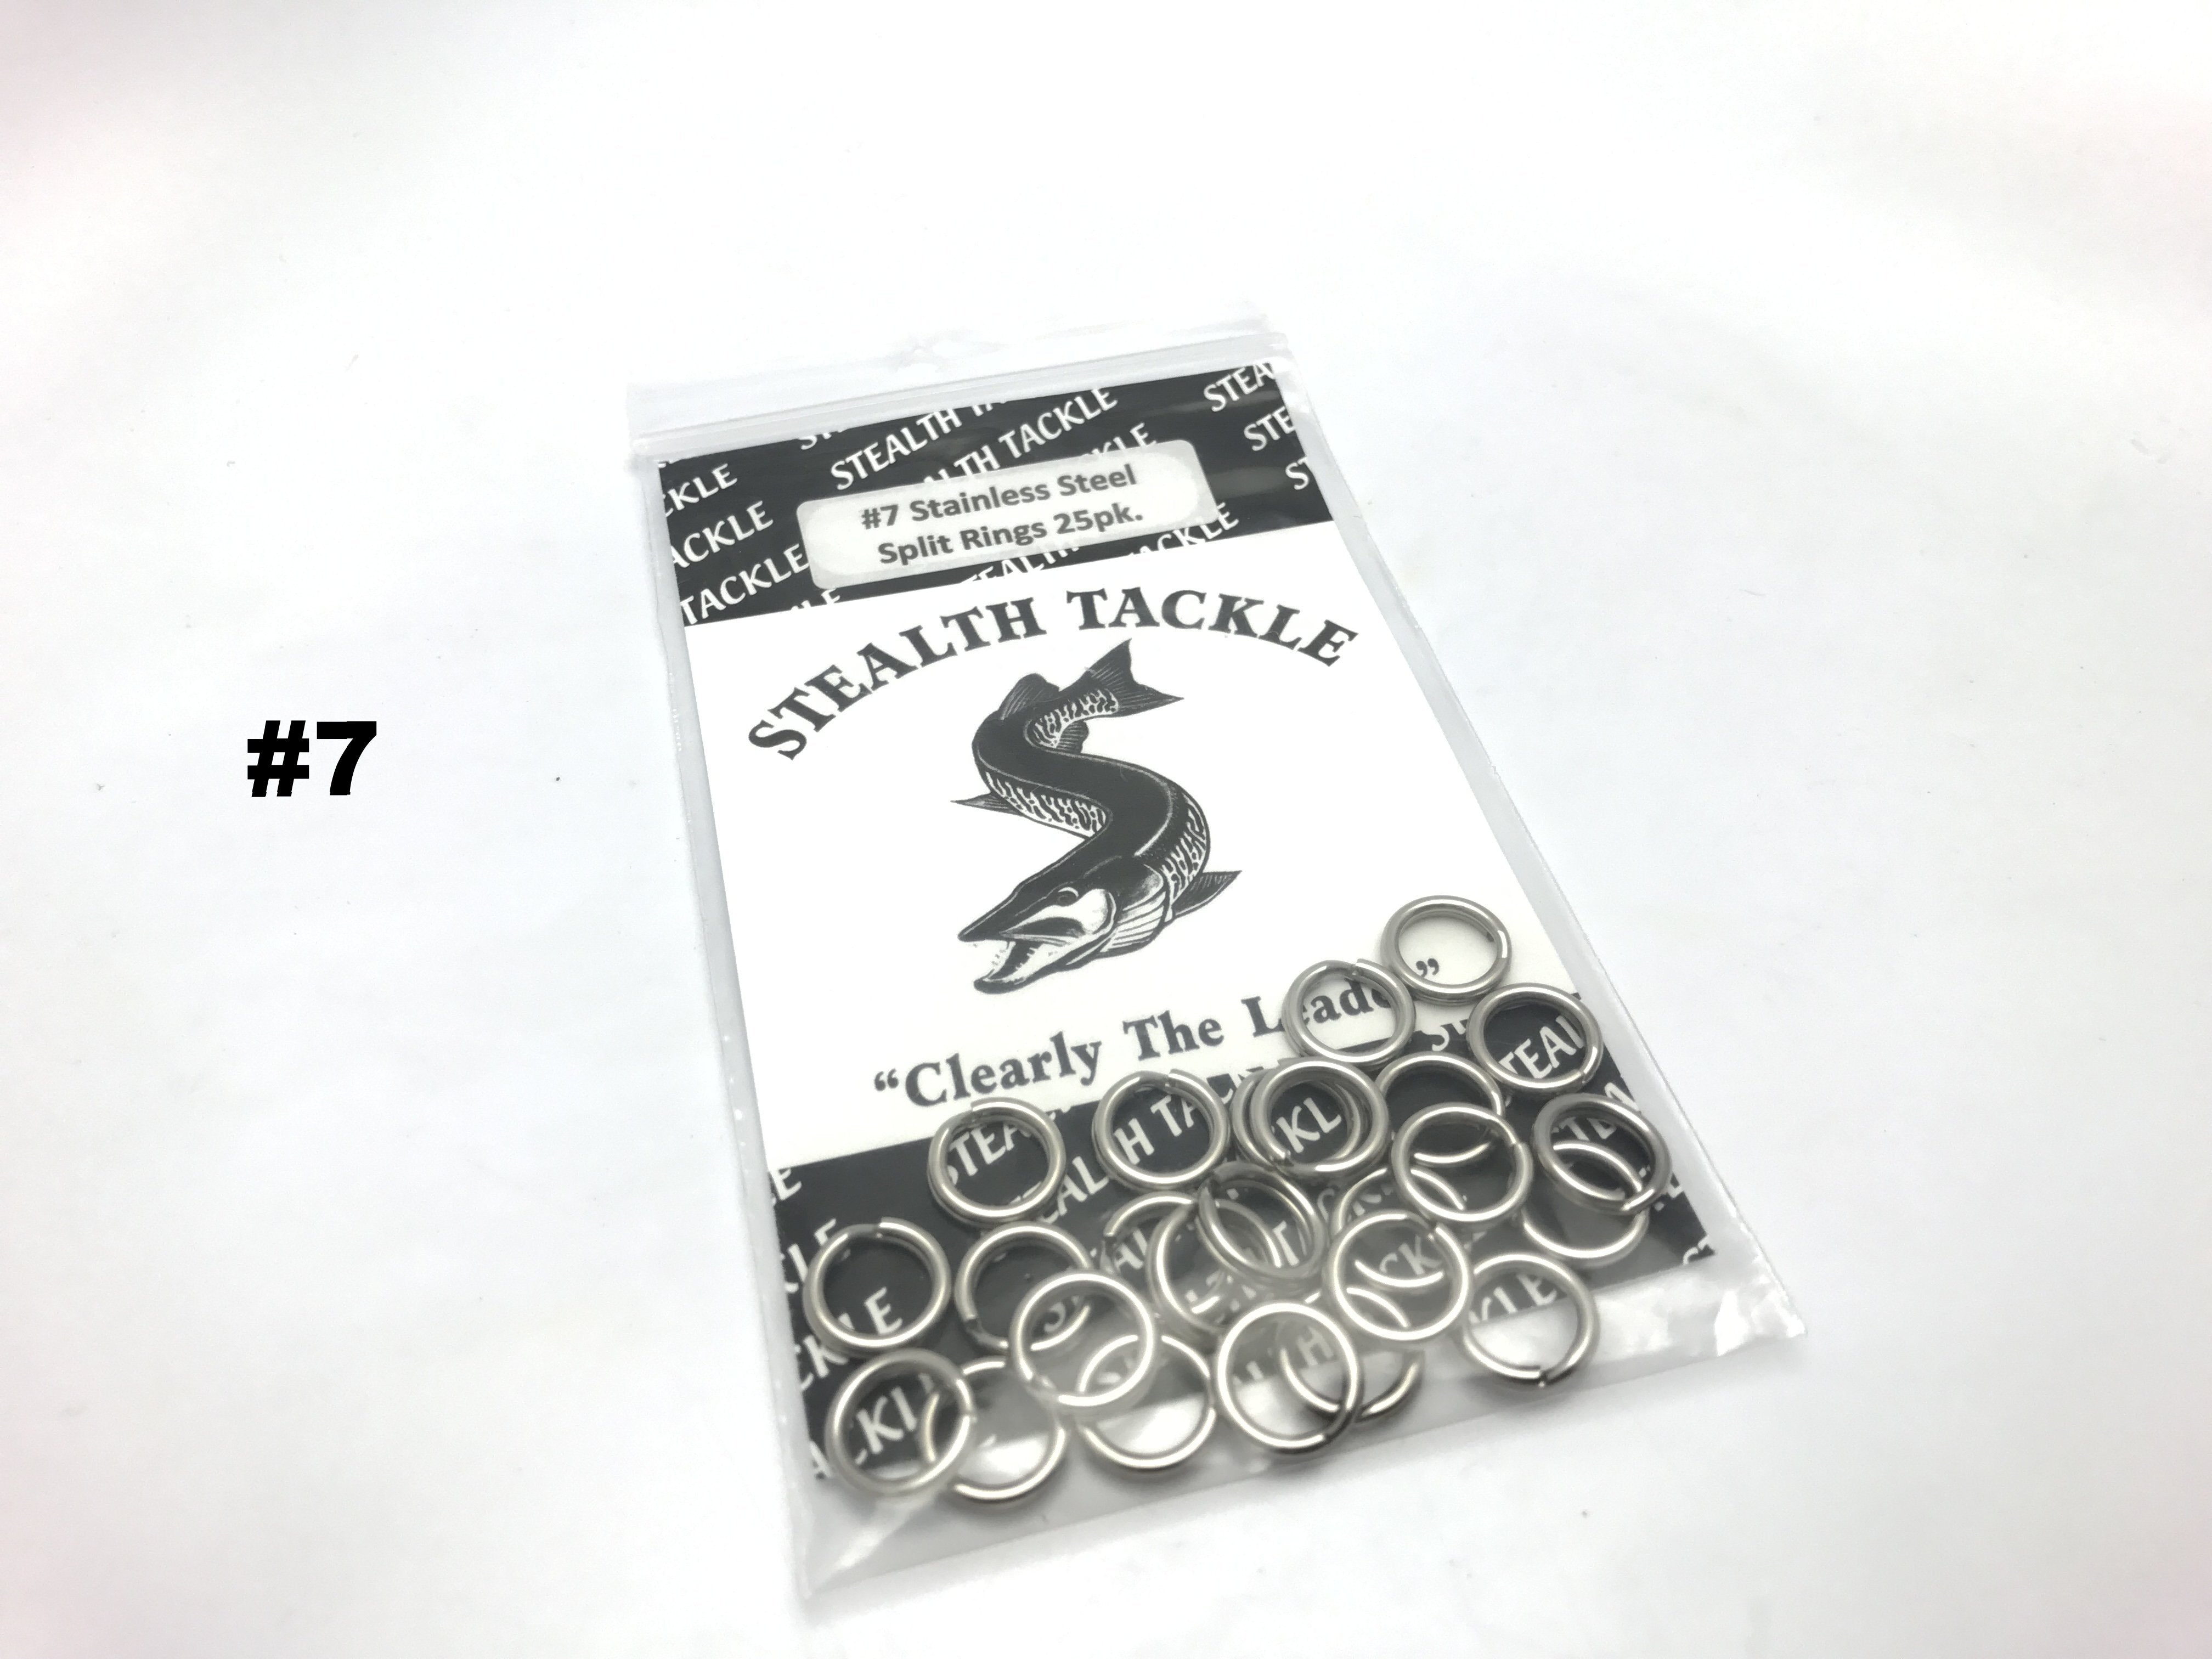 Stealth Tackle Stainless Steel Split Rings 25 Pack (3 sizes